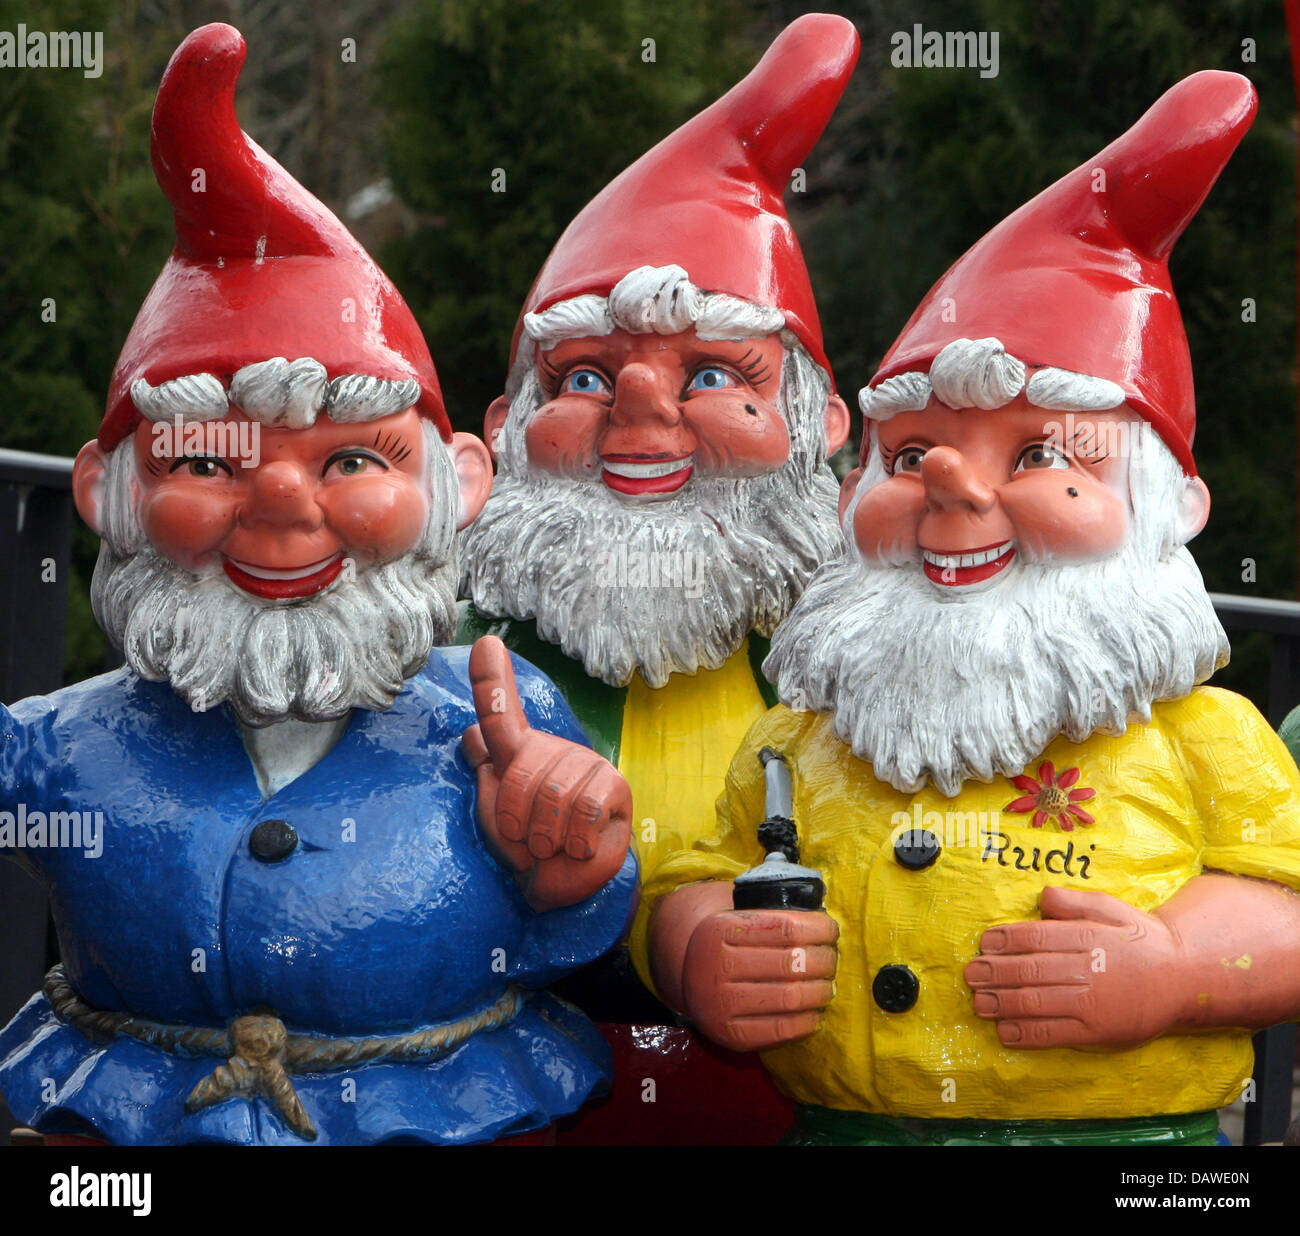 Garden Gnomes are on display at the Garden Gnome Park in Trusetal, Germany,  Wednesday 04 April 2007. Good Friday marks the seasonal opening of the park  whose 2,000 garden gnomes attract a